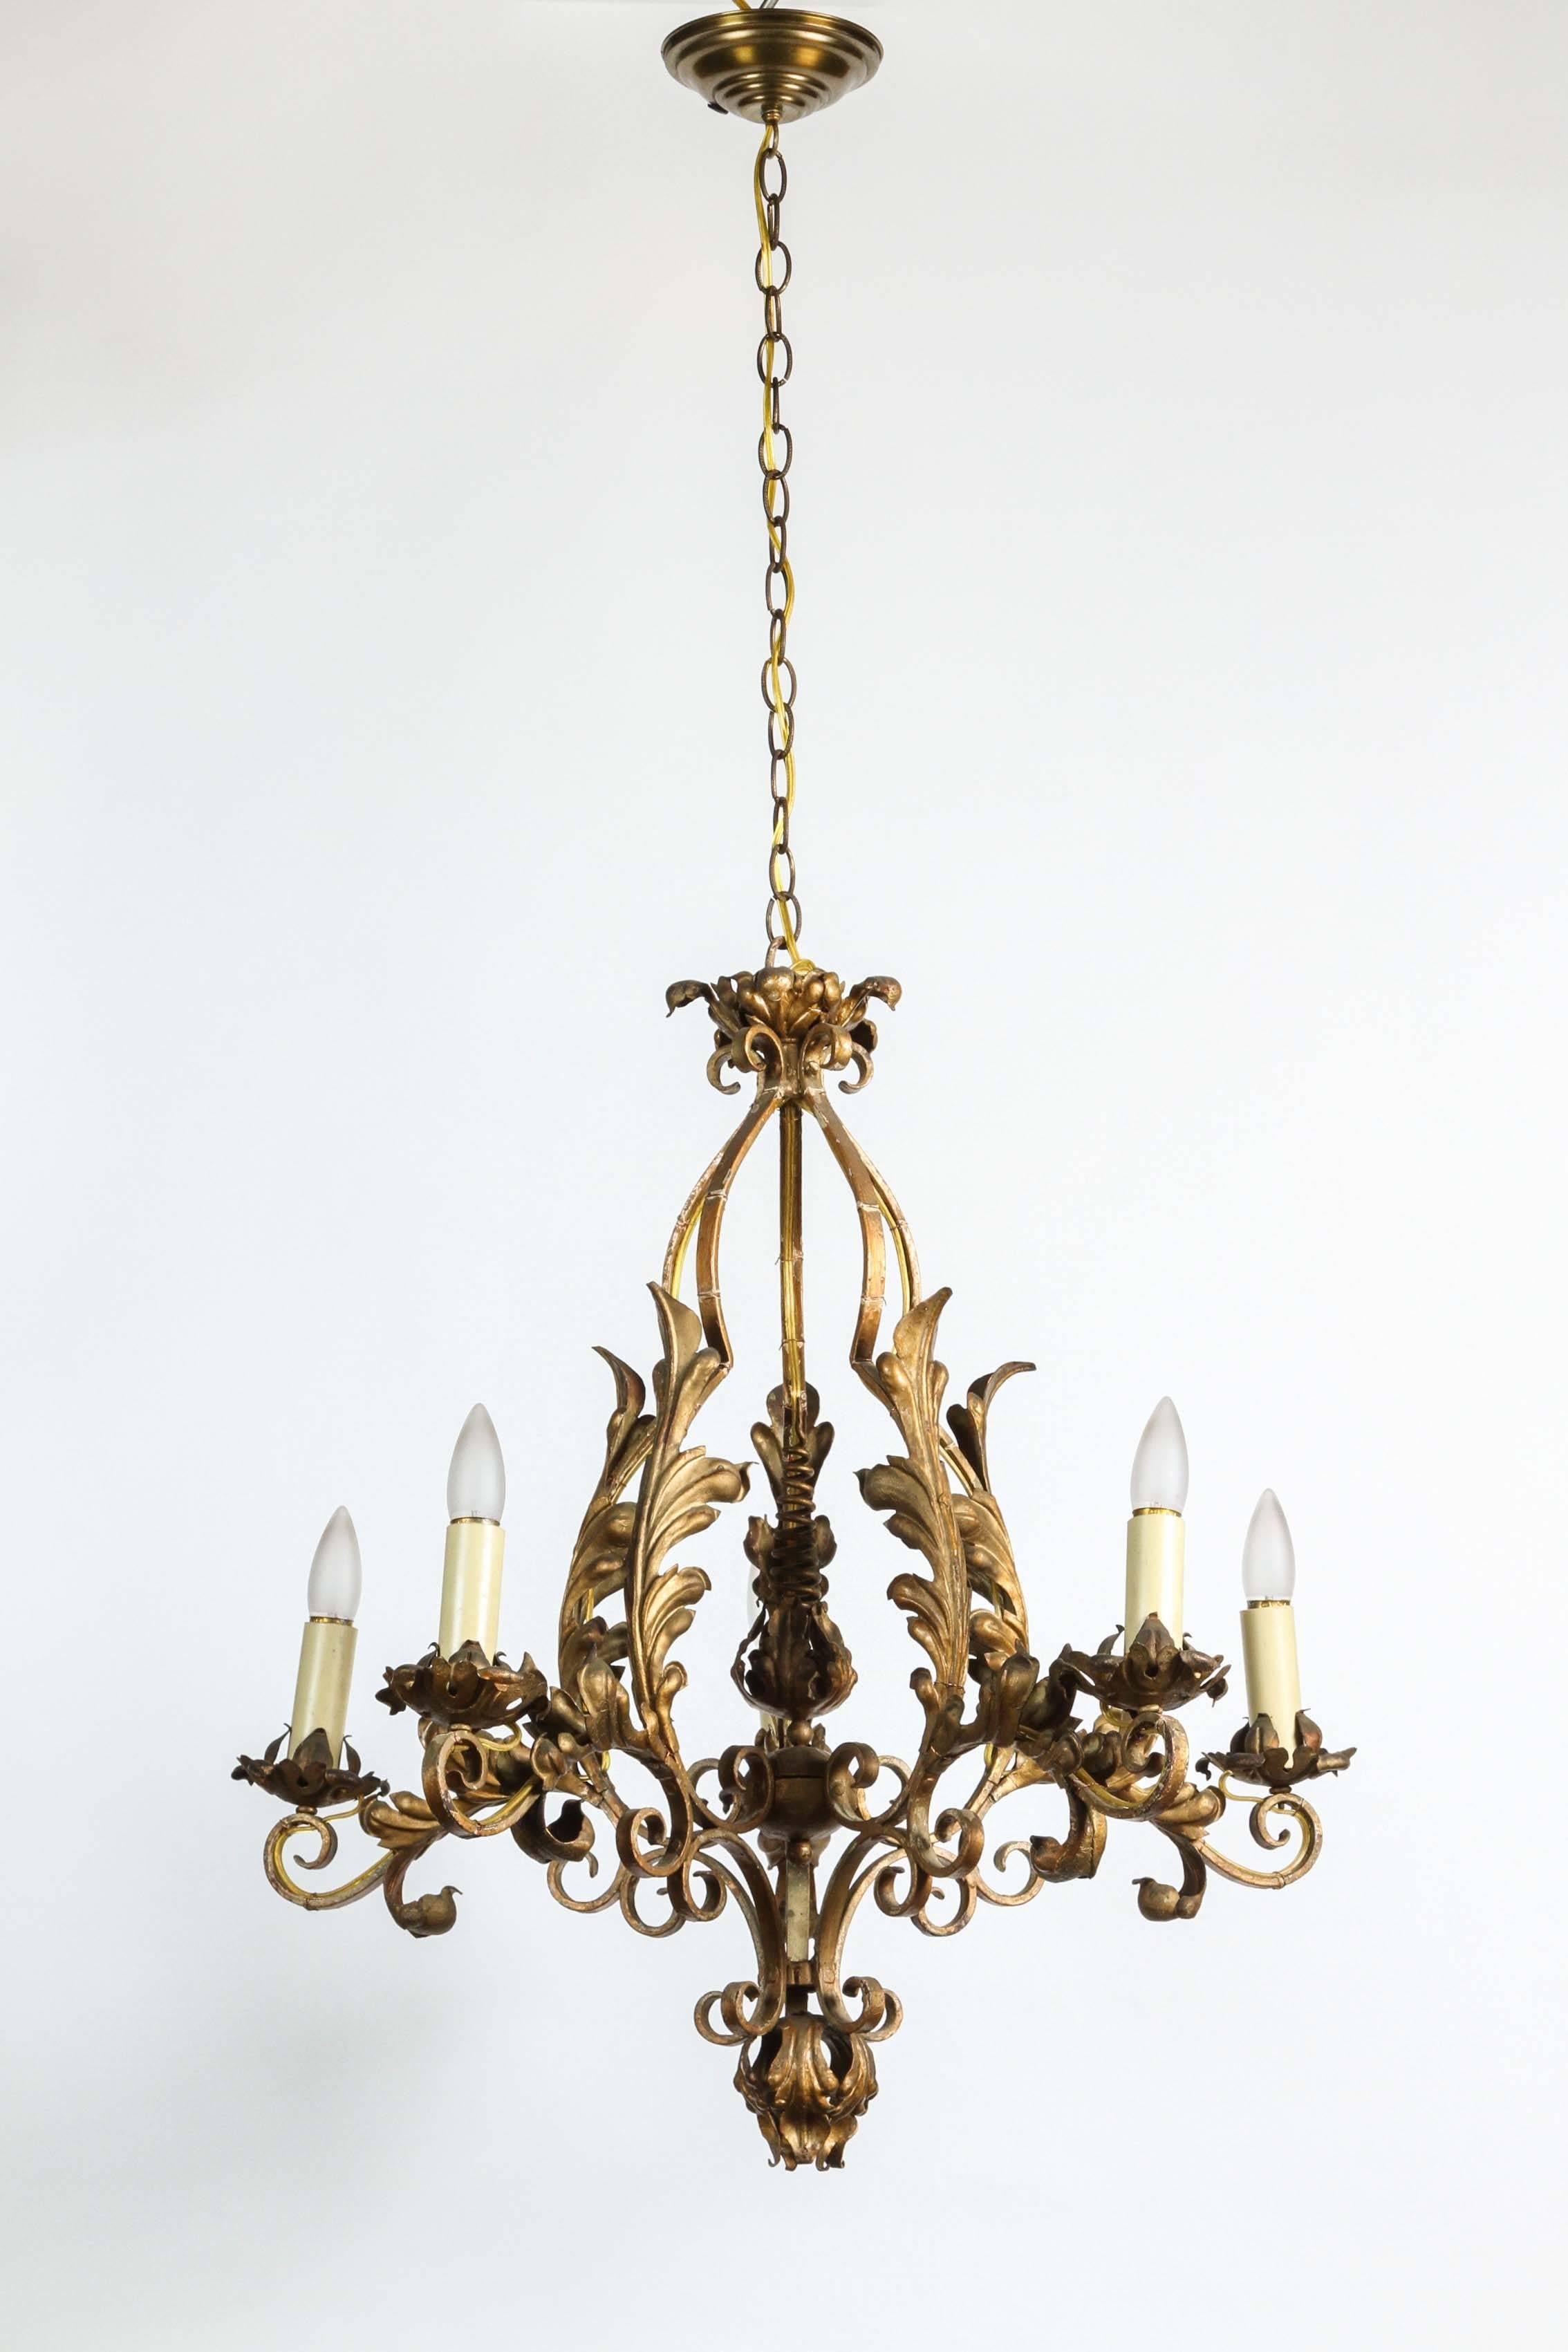 1940s aged gold look with wrought iron decorative leaves and five lights. Re-wired. This can be seen at 1800 South 18th Grand Ave location in Downtown Los Angeles.